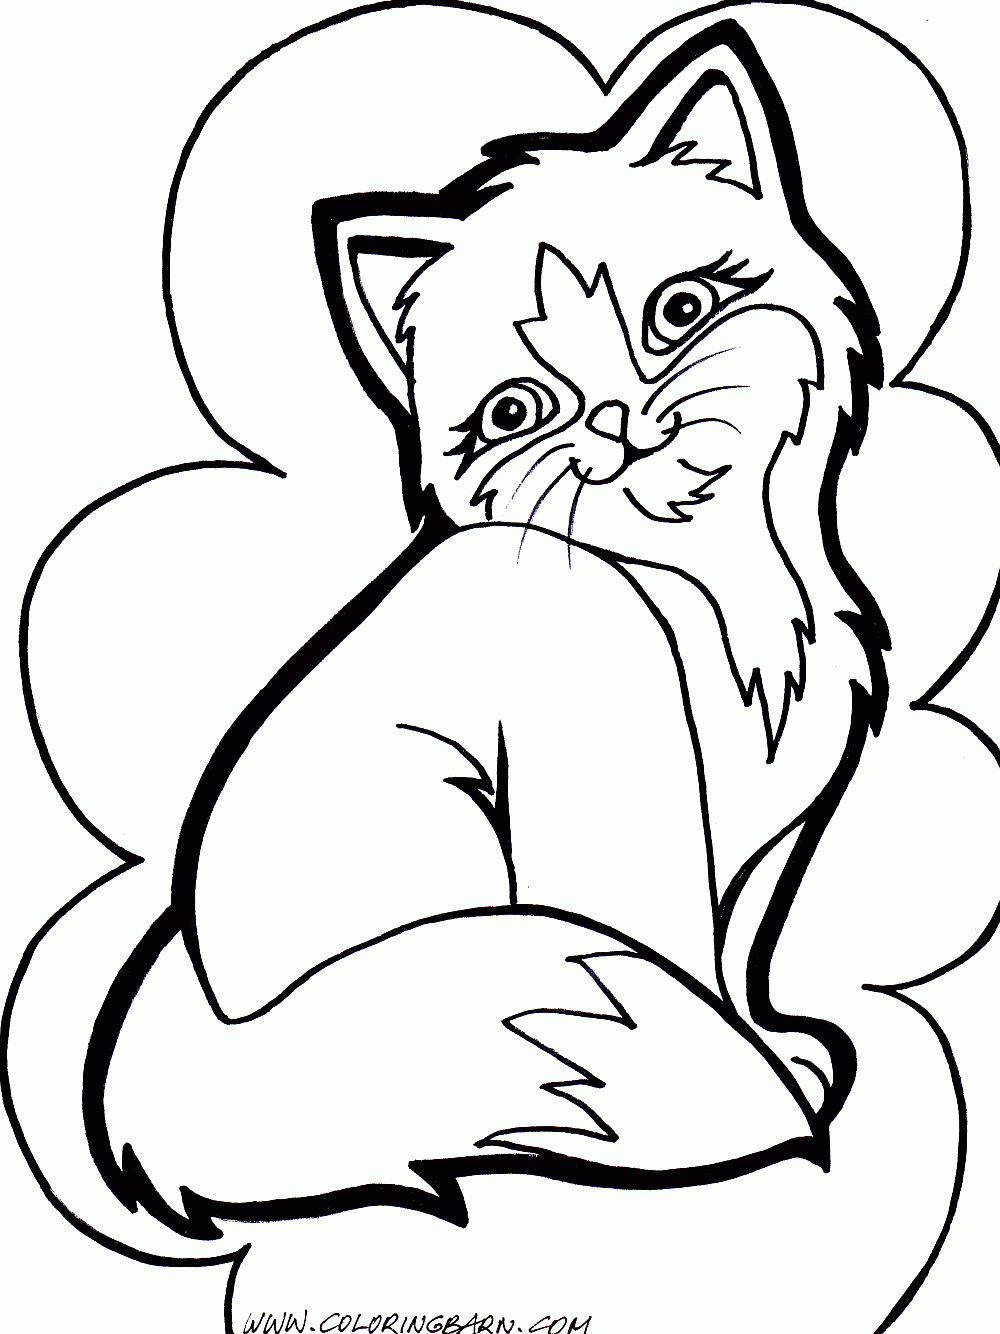 Puppy And Kitten Coloring Page - Coloring Home